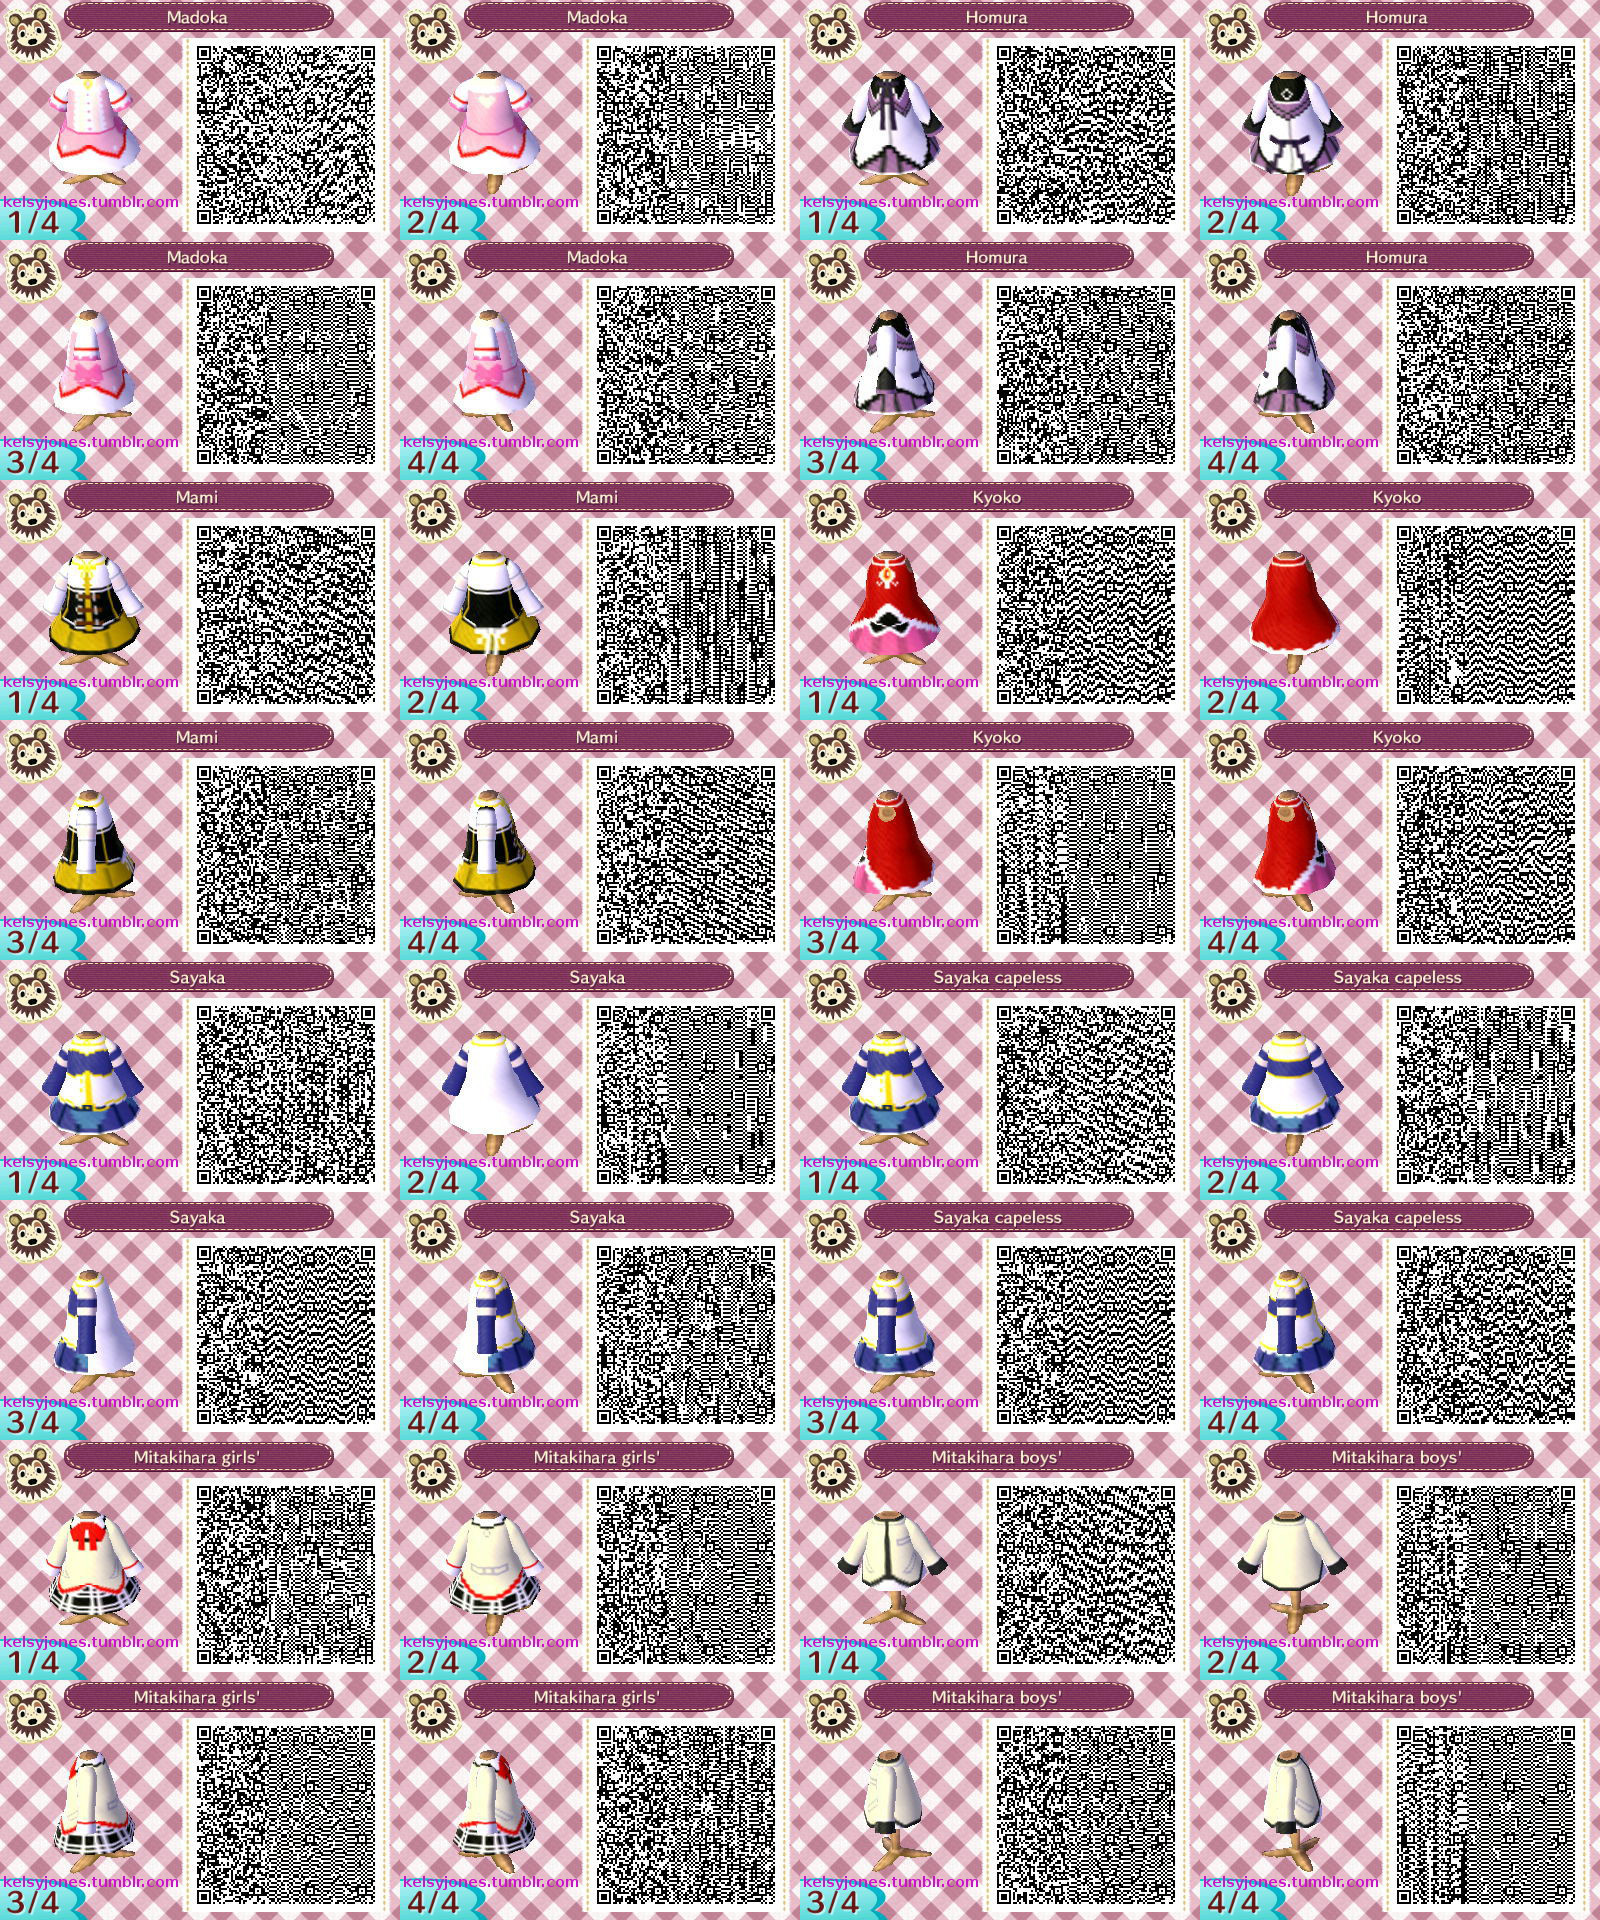 Free Download Acnl Madoka Magica Qr Codes By Kelsyjones 1600x19 For Your Desktop Mobile Tablet Explore 49 Acnl Wallpaper Qr Animal Crossing Qr Codes Wallpaper Ipod Qr Codes Wallpaper